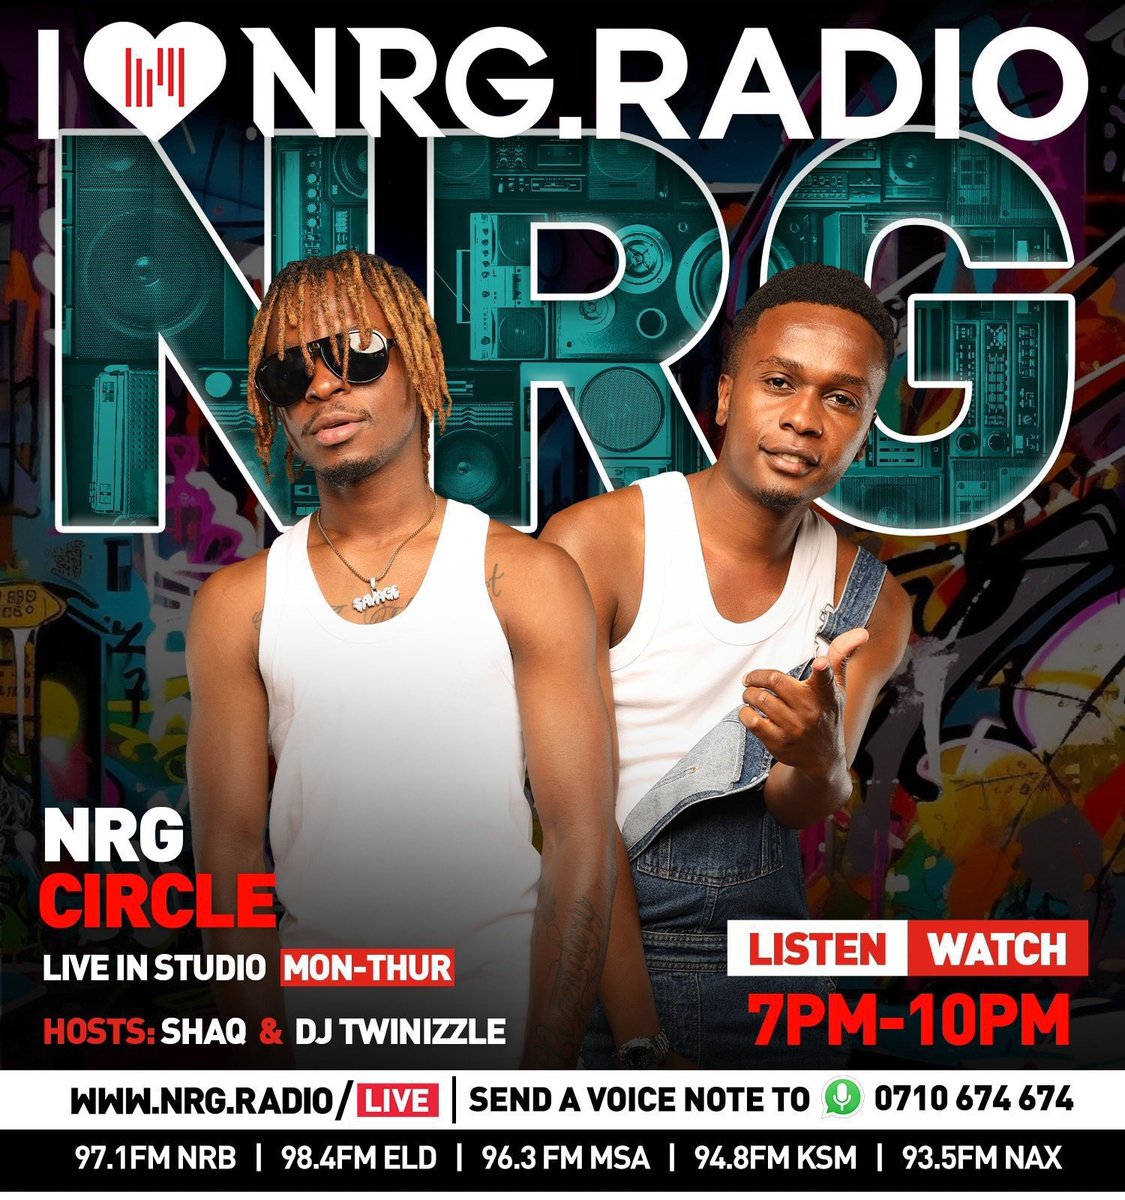 Faamm check in to the littest night show in town #NRGCircleRave